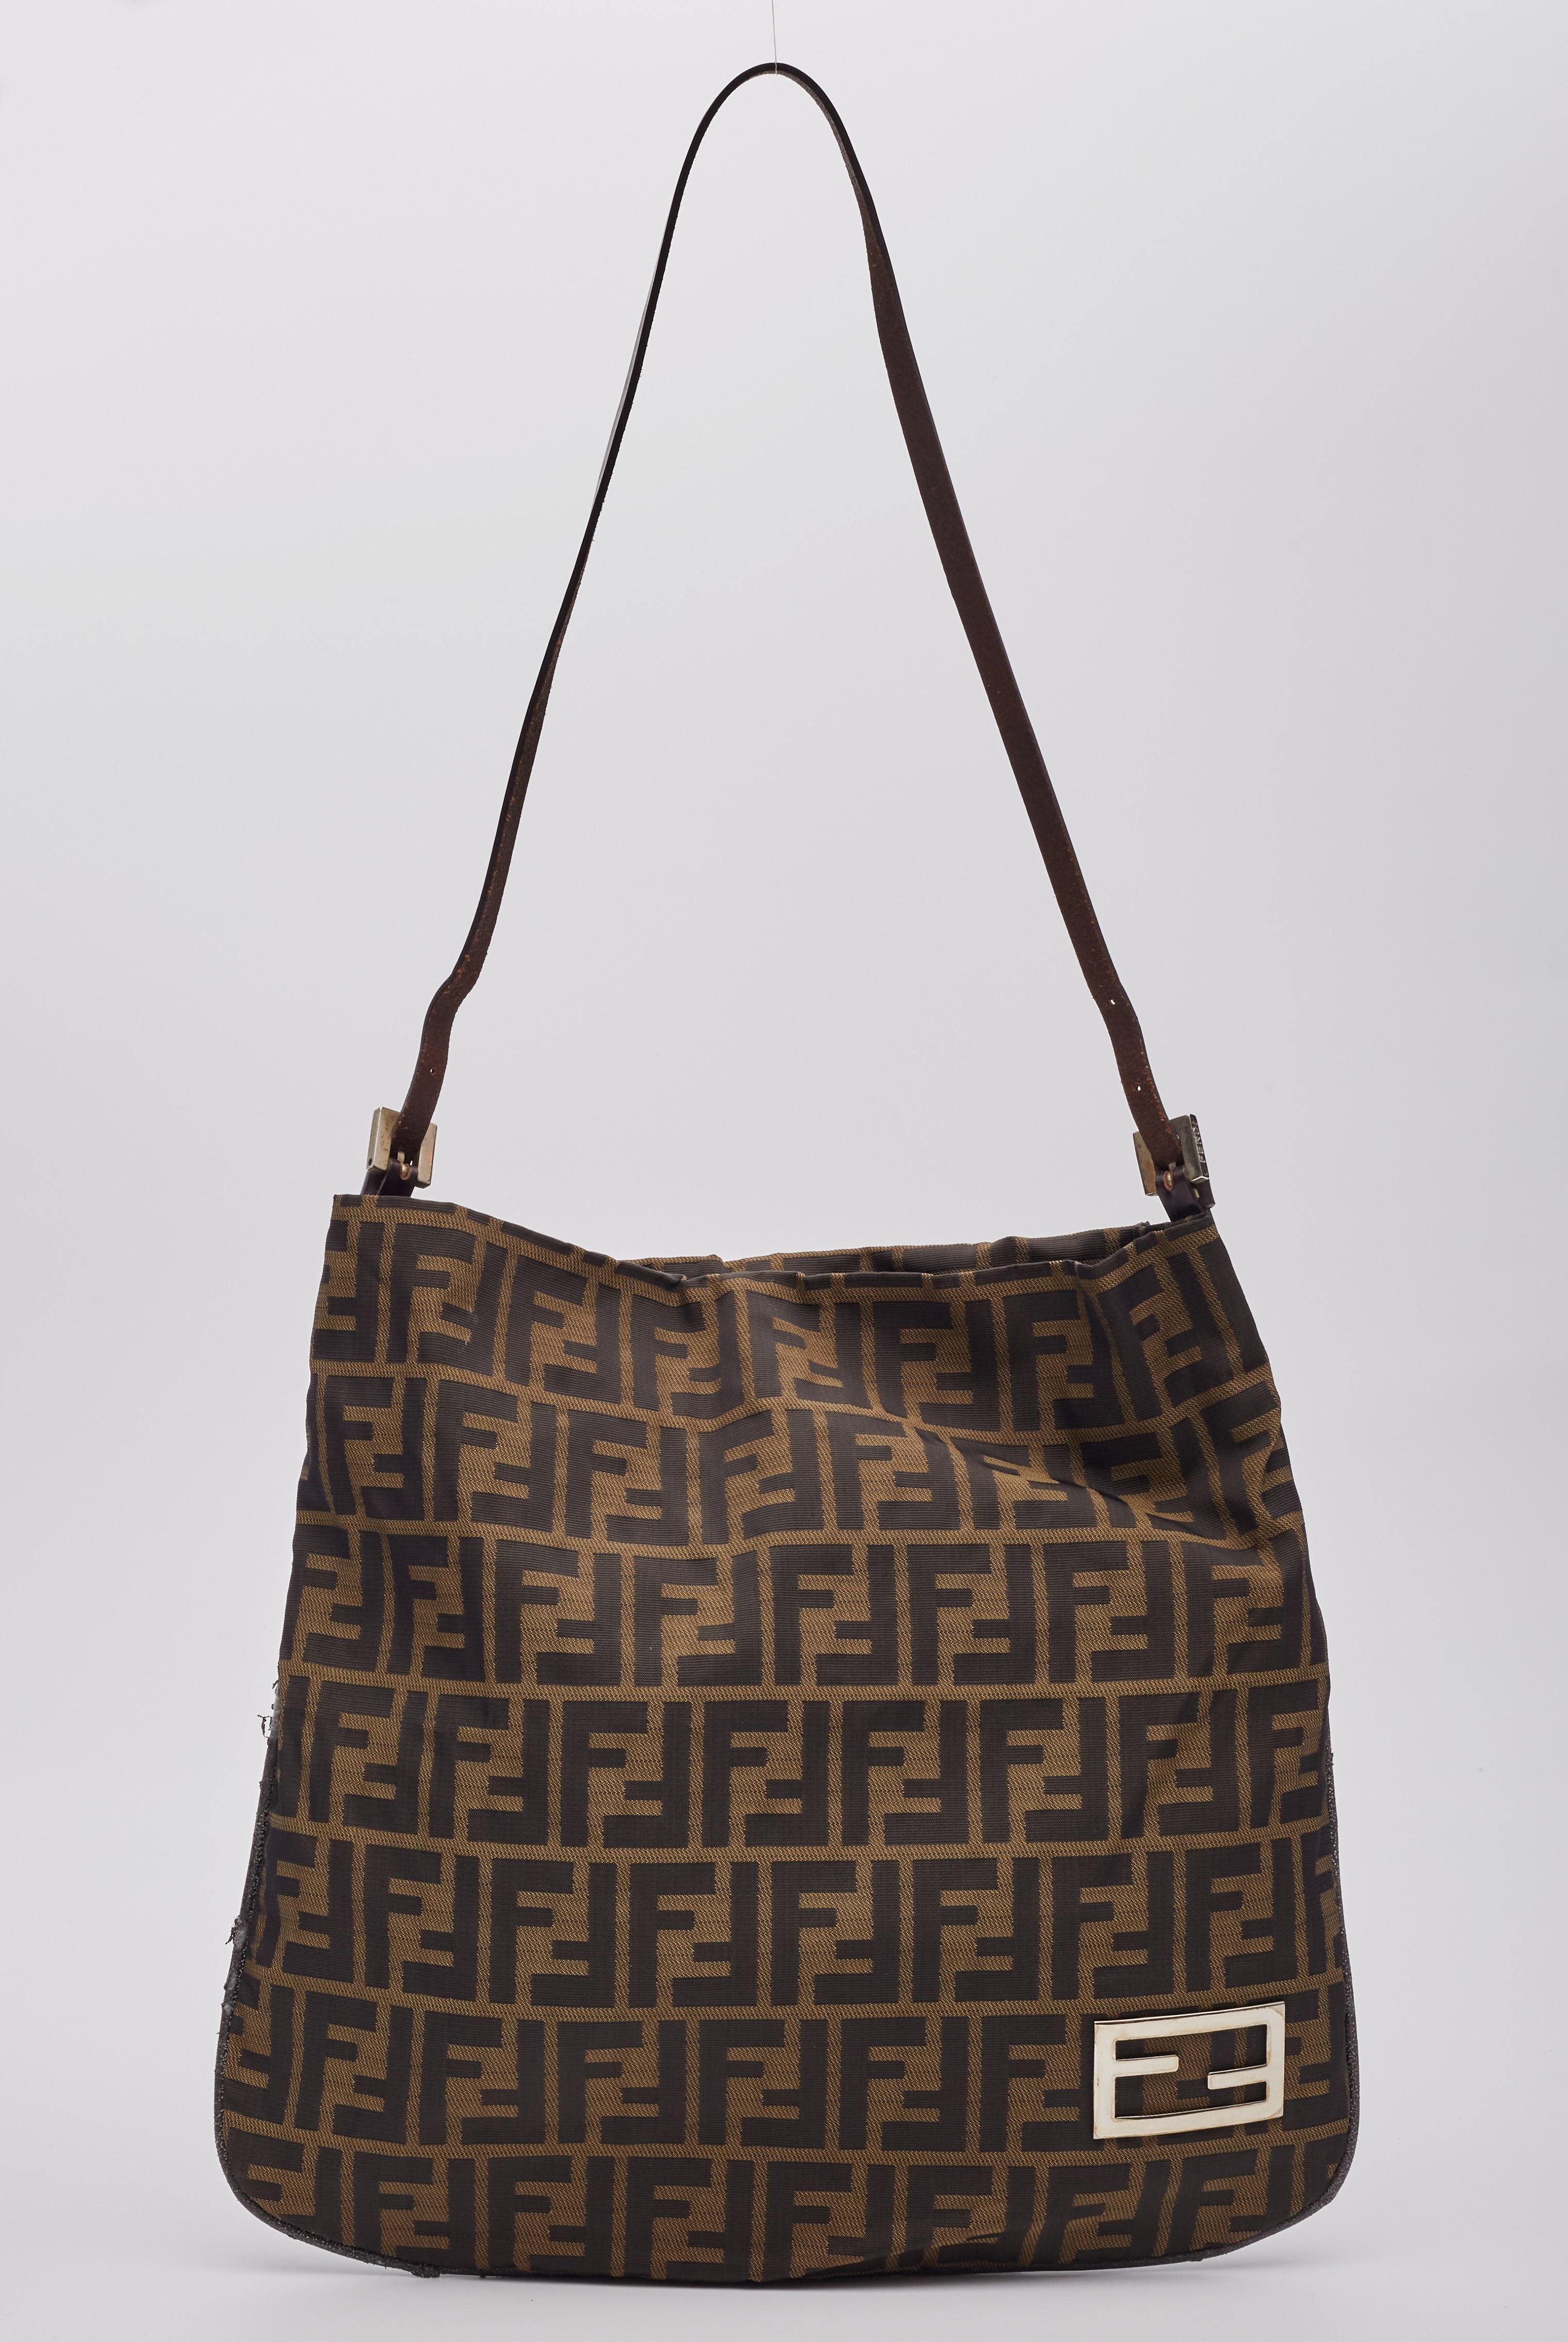 Fendi Zucca FF Print Canvas Shoulder Bag Brown In Good Condition For Sale In Montreal, Quebec